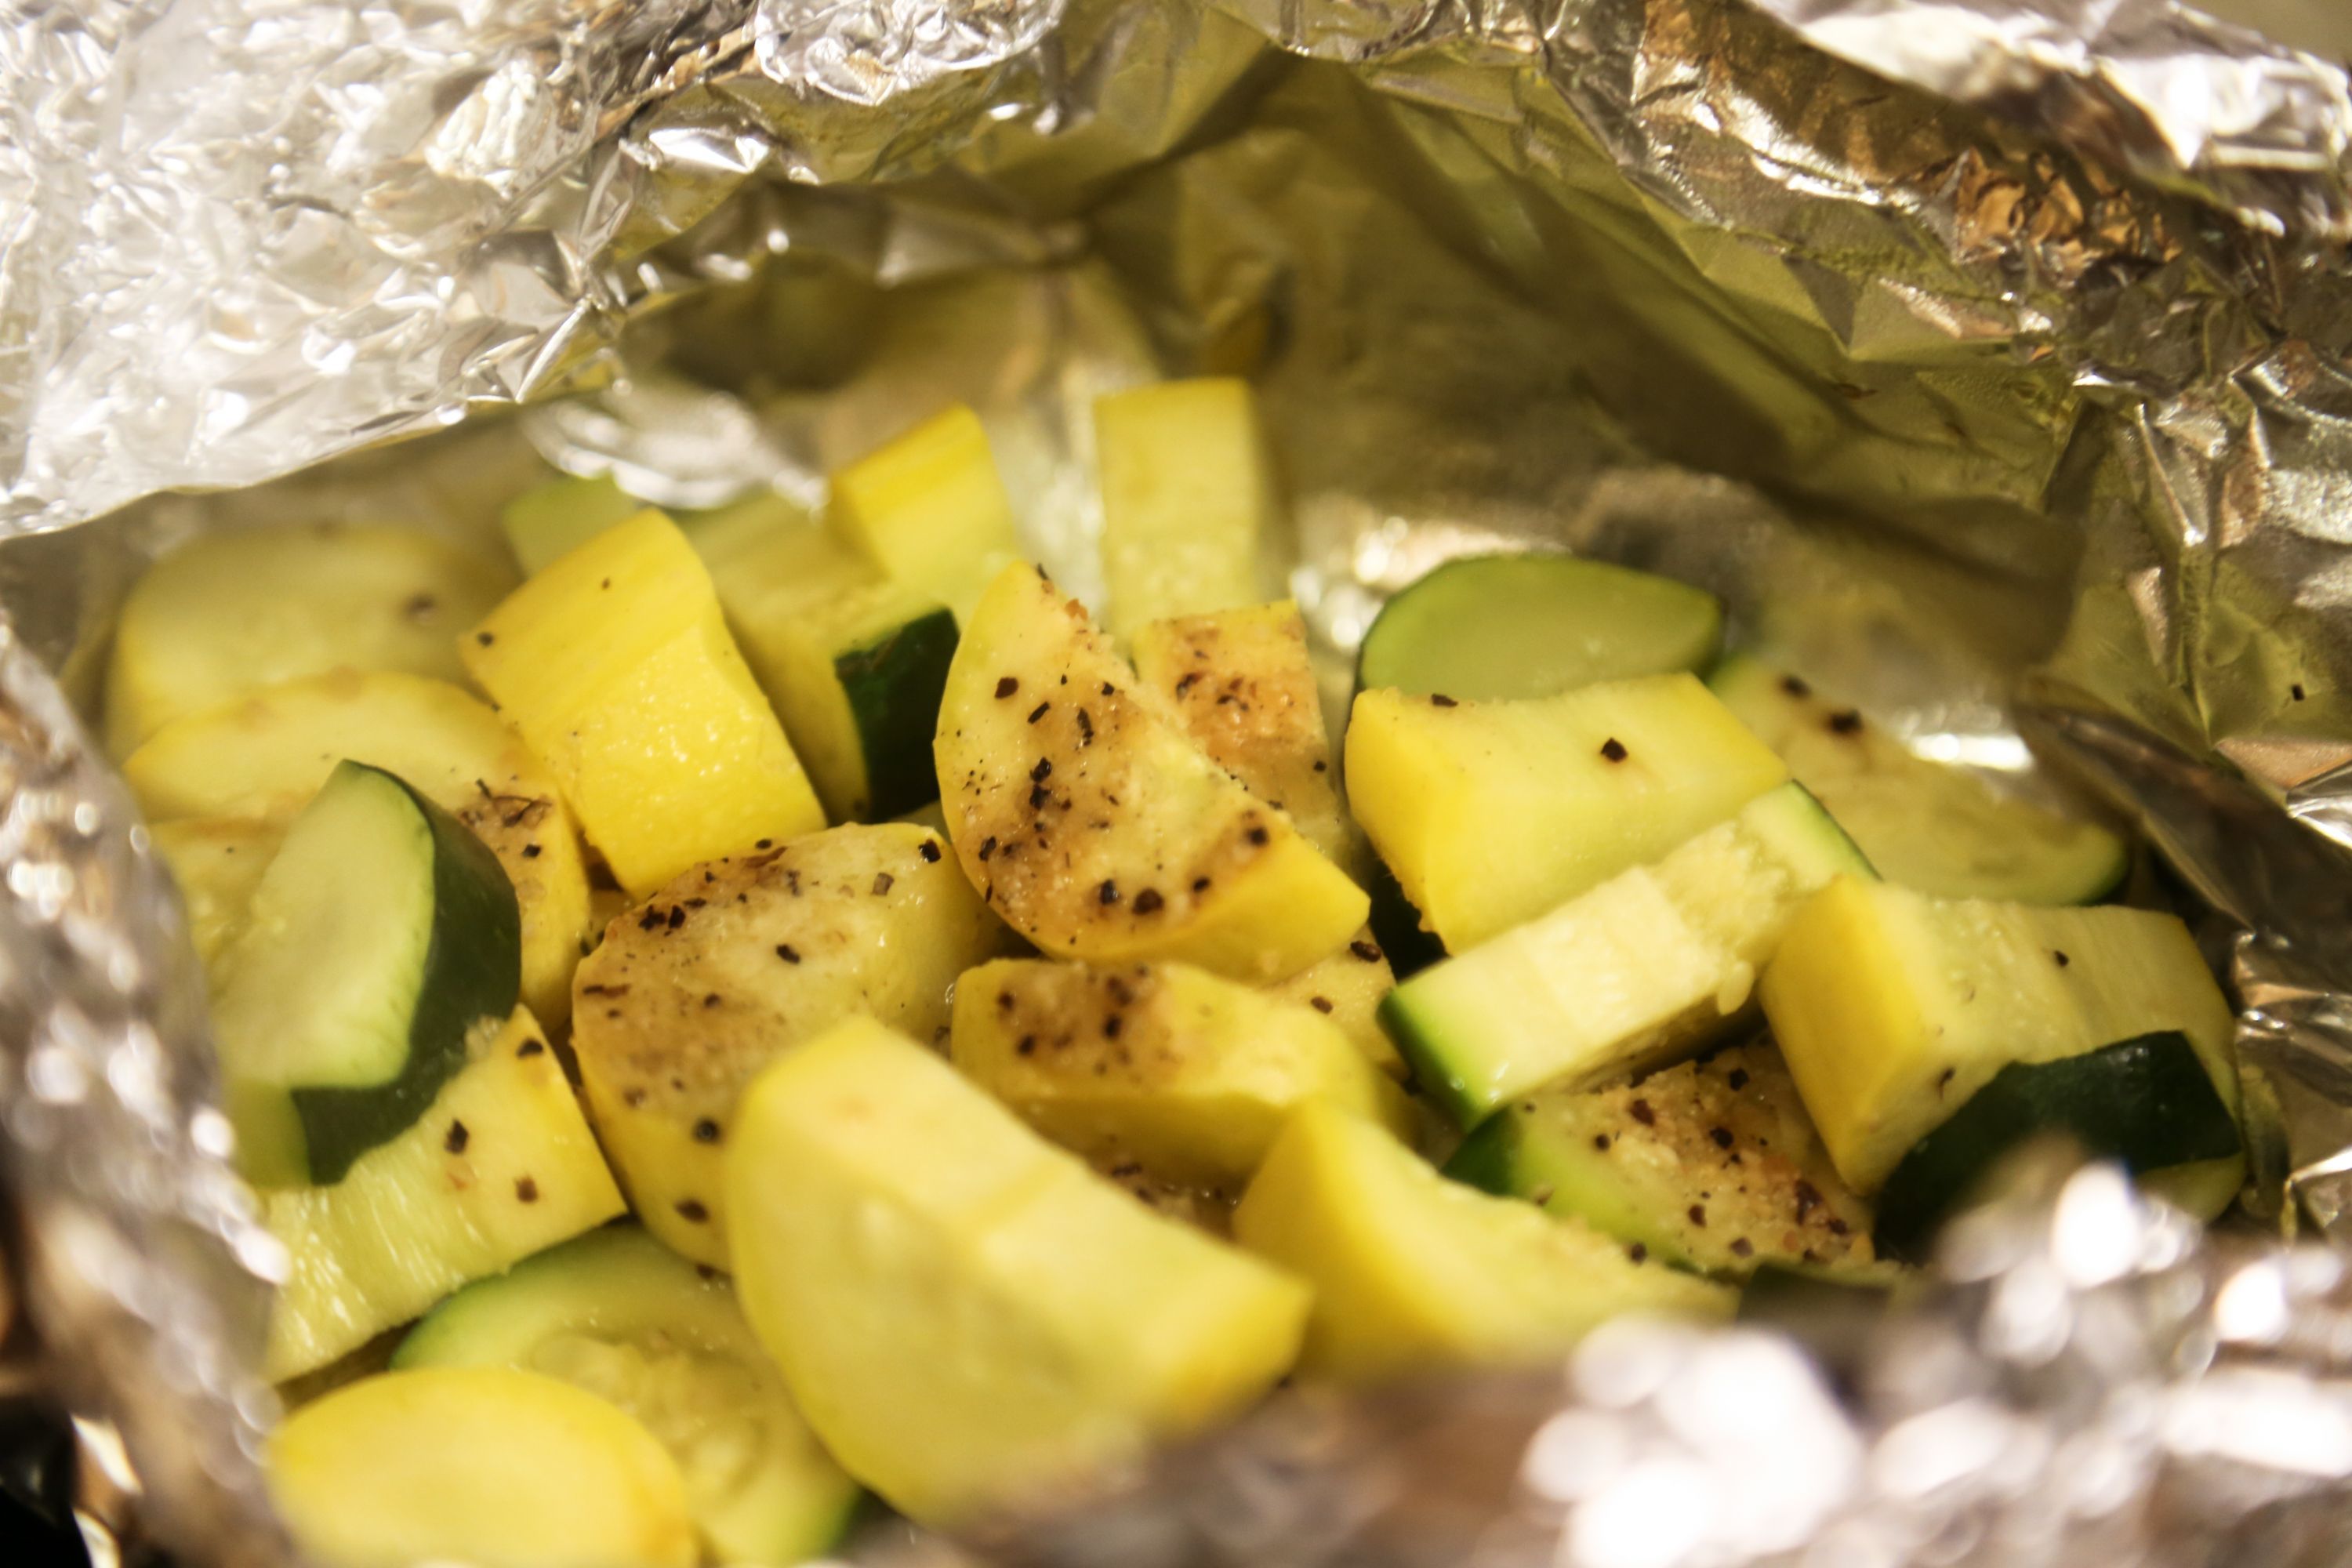 How to Grill Squash and Zucchini in Foil -   16 grilled squash recipes
 ideas